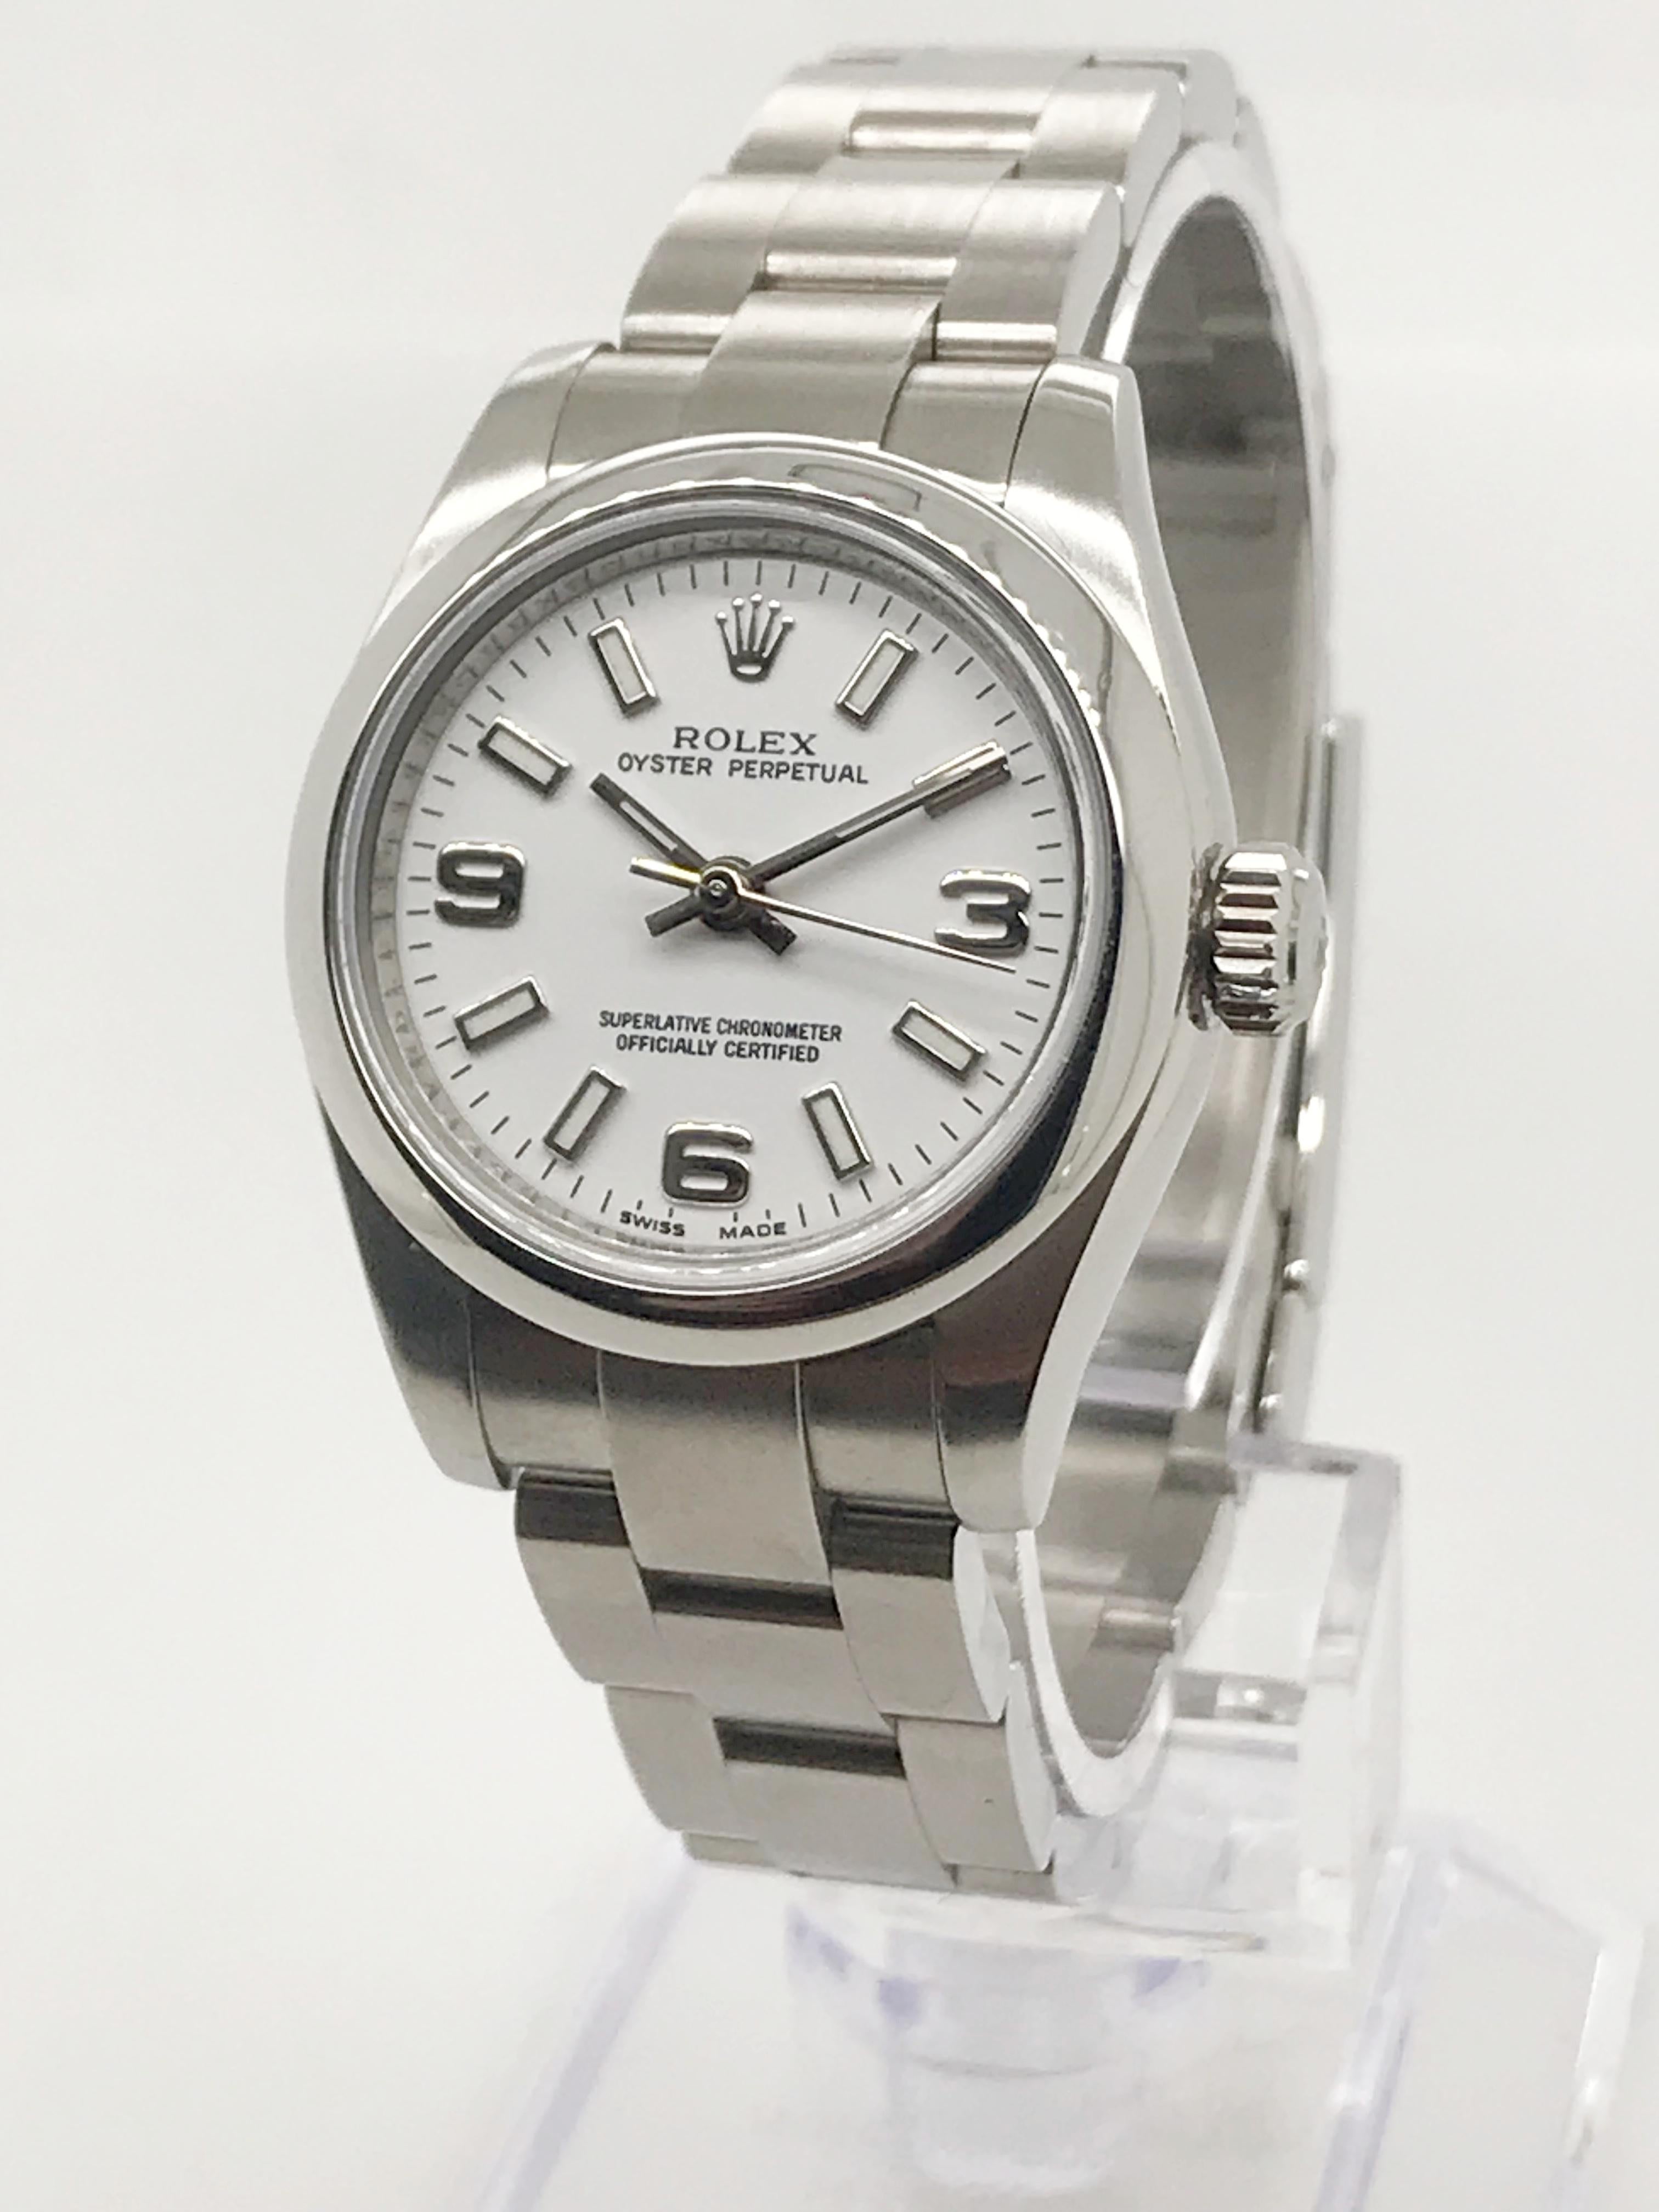 The ladies oyster perpetual is Rolex's most classic model. This watch is sold with its original box and informational card. 

This timepiece was recently serviced and authenticated by a Rolex certified watchmaker.